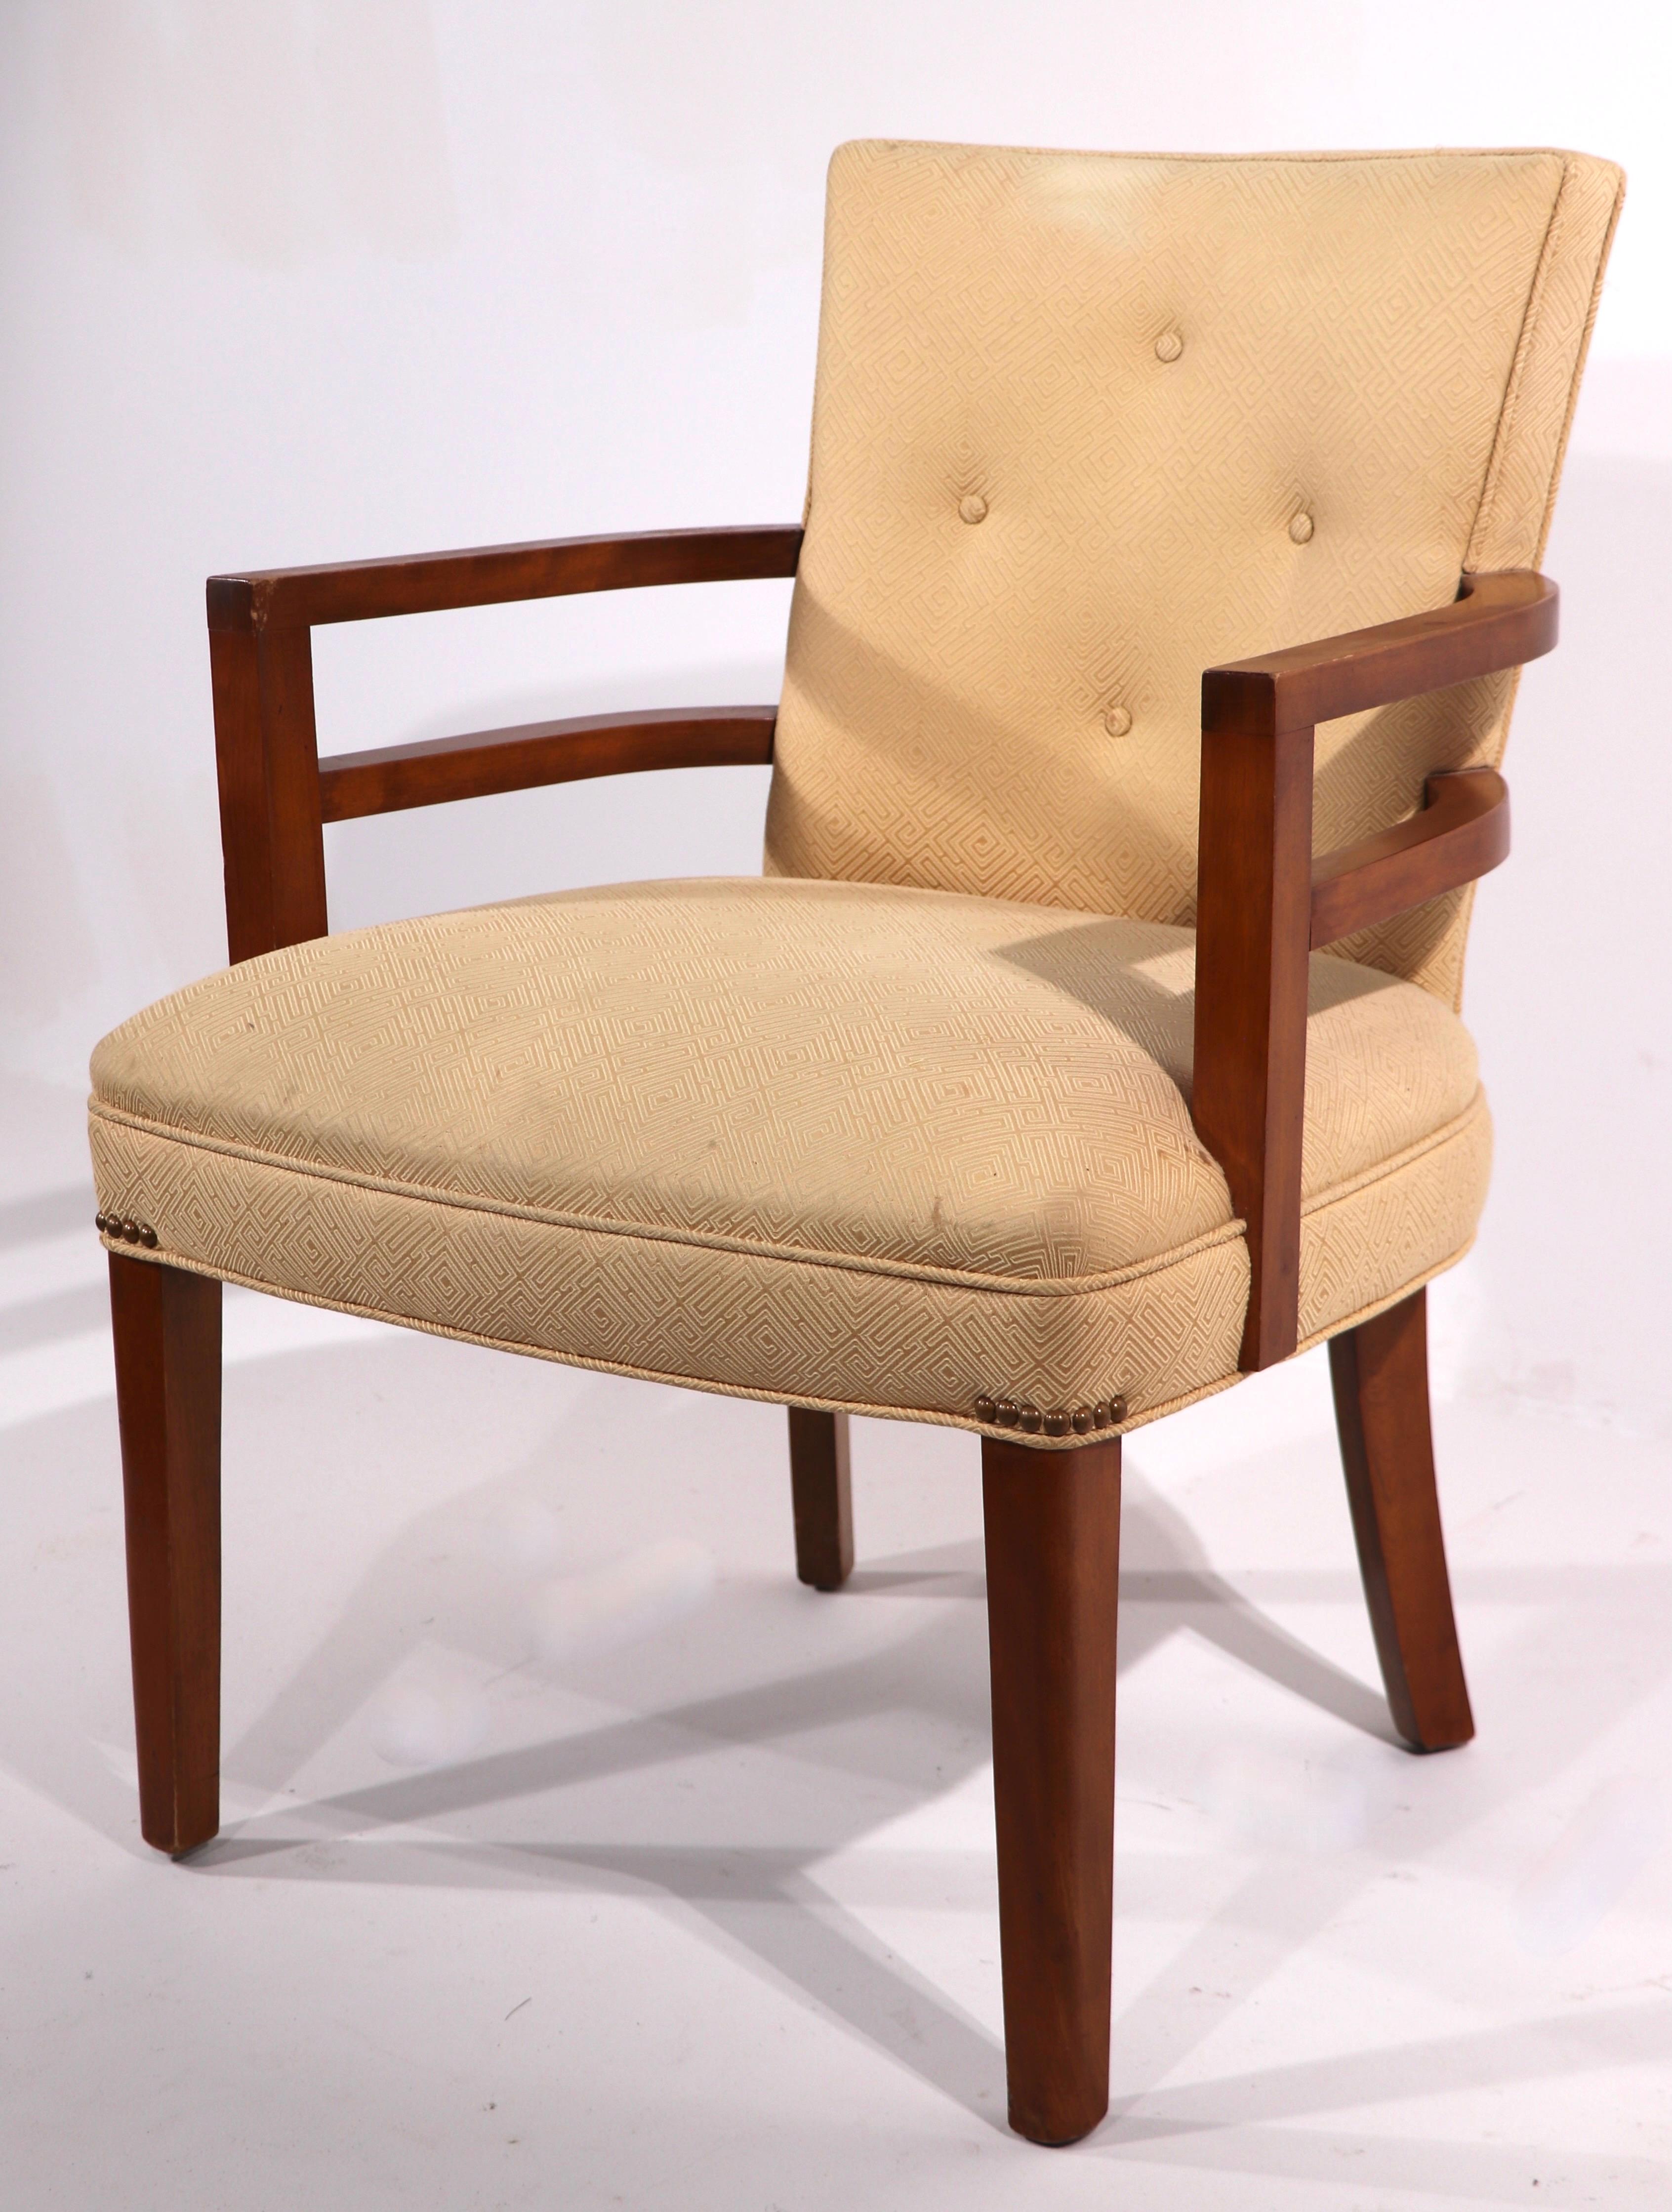 Classic Machine Age period arm chair, having speed band wrap around arms, upholstered back, and seat. This example is in very good, original condition, clean and ready to use, showing only light cosmetic wear, normal and consistent with